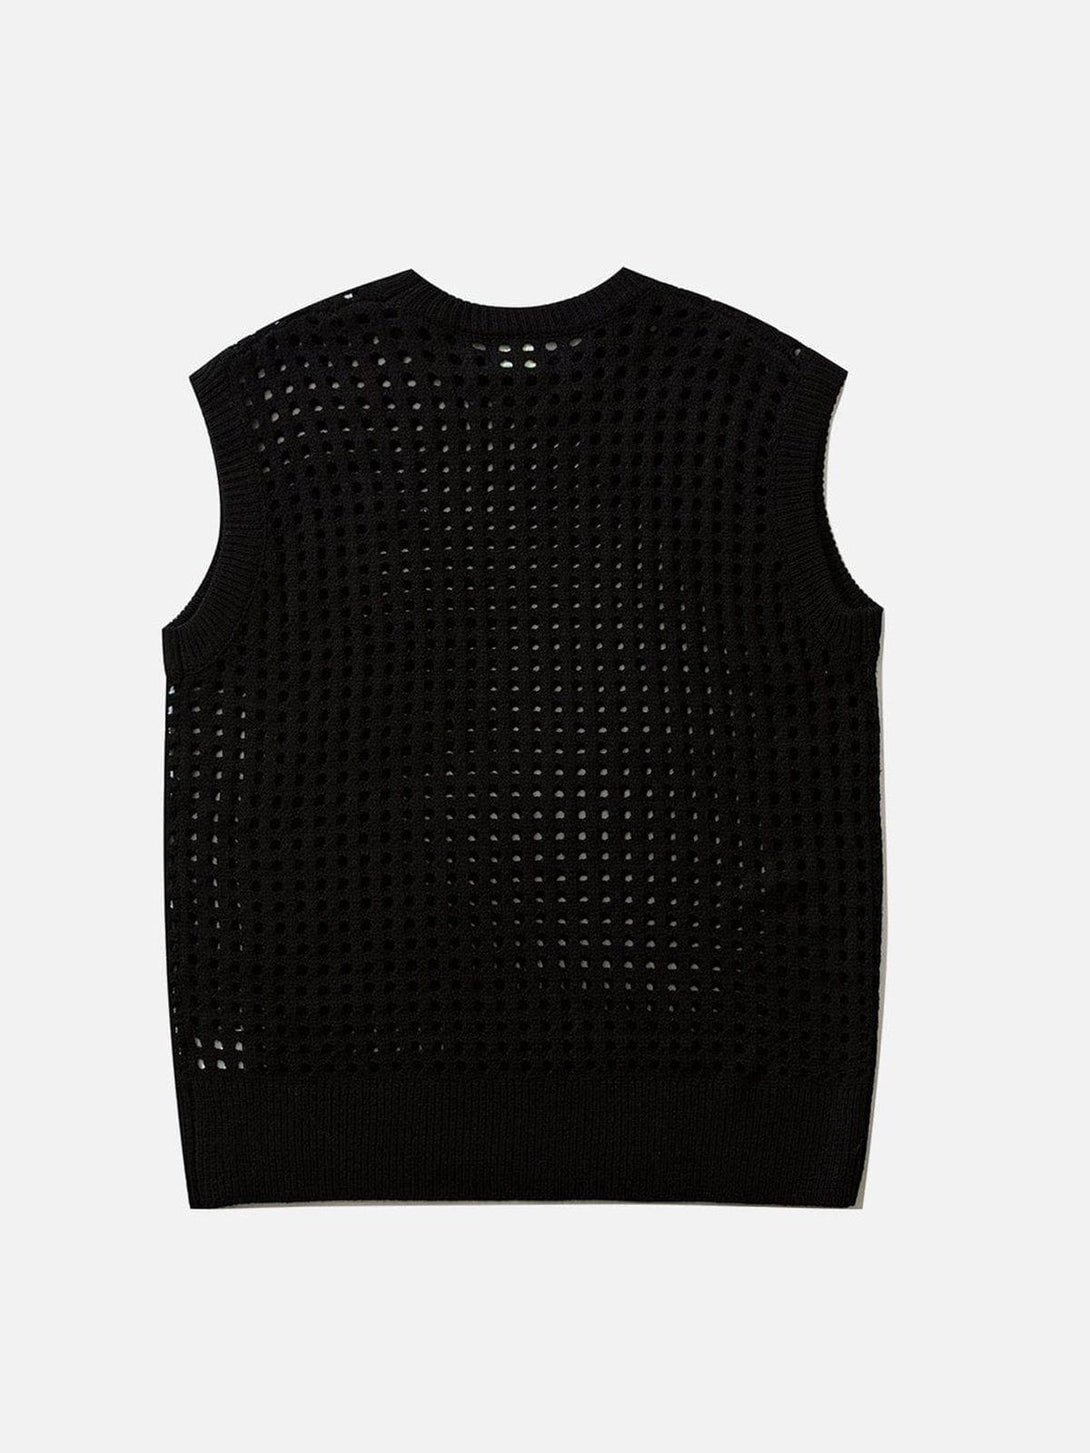 Majesda® - Knitted Cutout Sweater Vest outfit ideas streetwear fashion